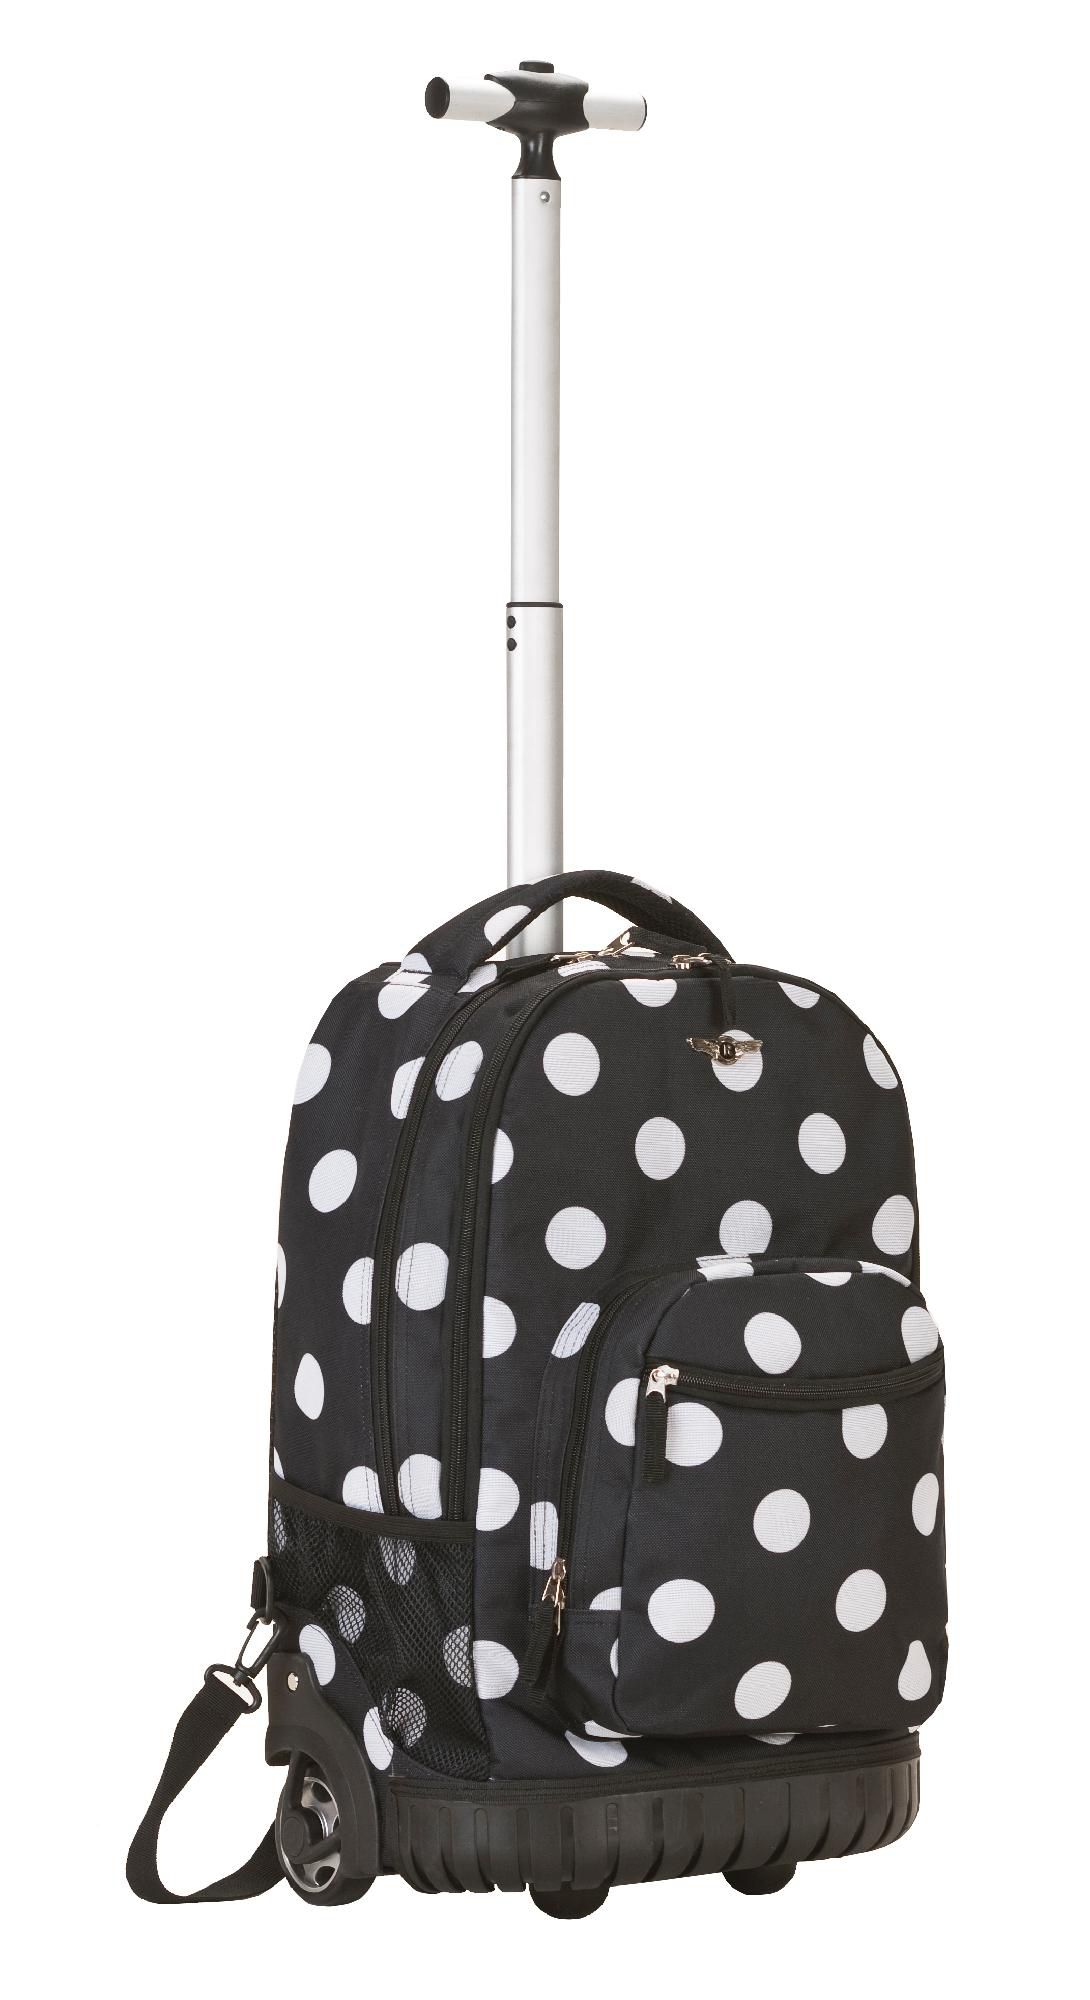 Rockland Fox Luggage 19" Rolling Backpack, Black Dot